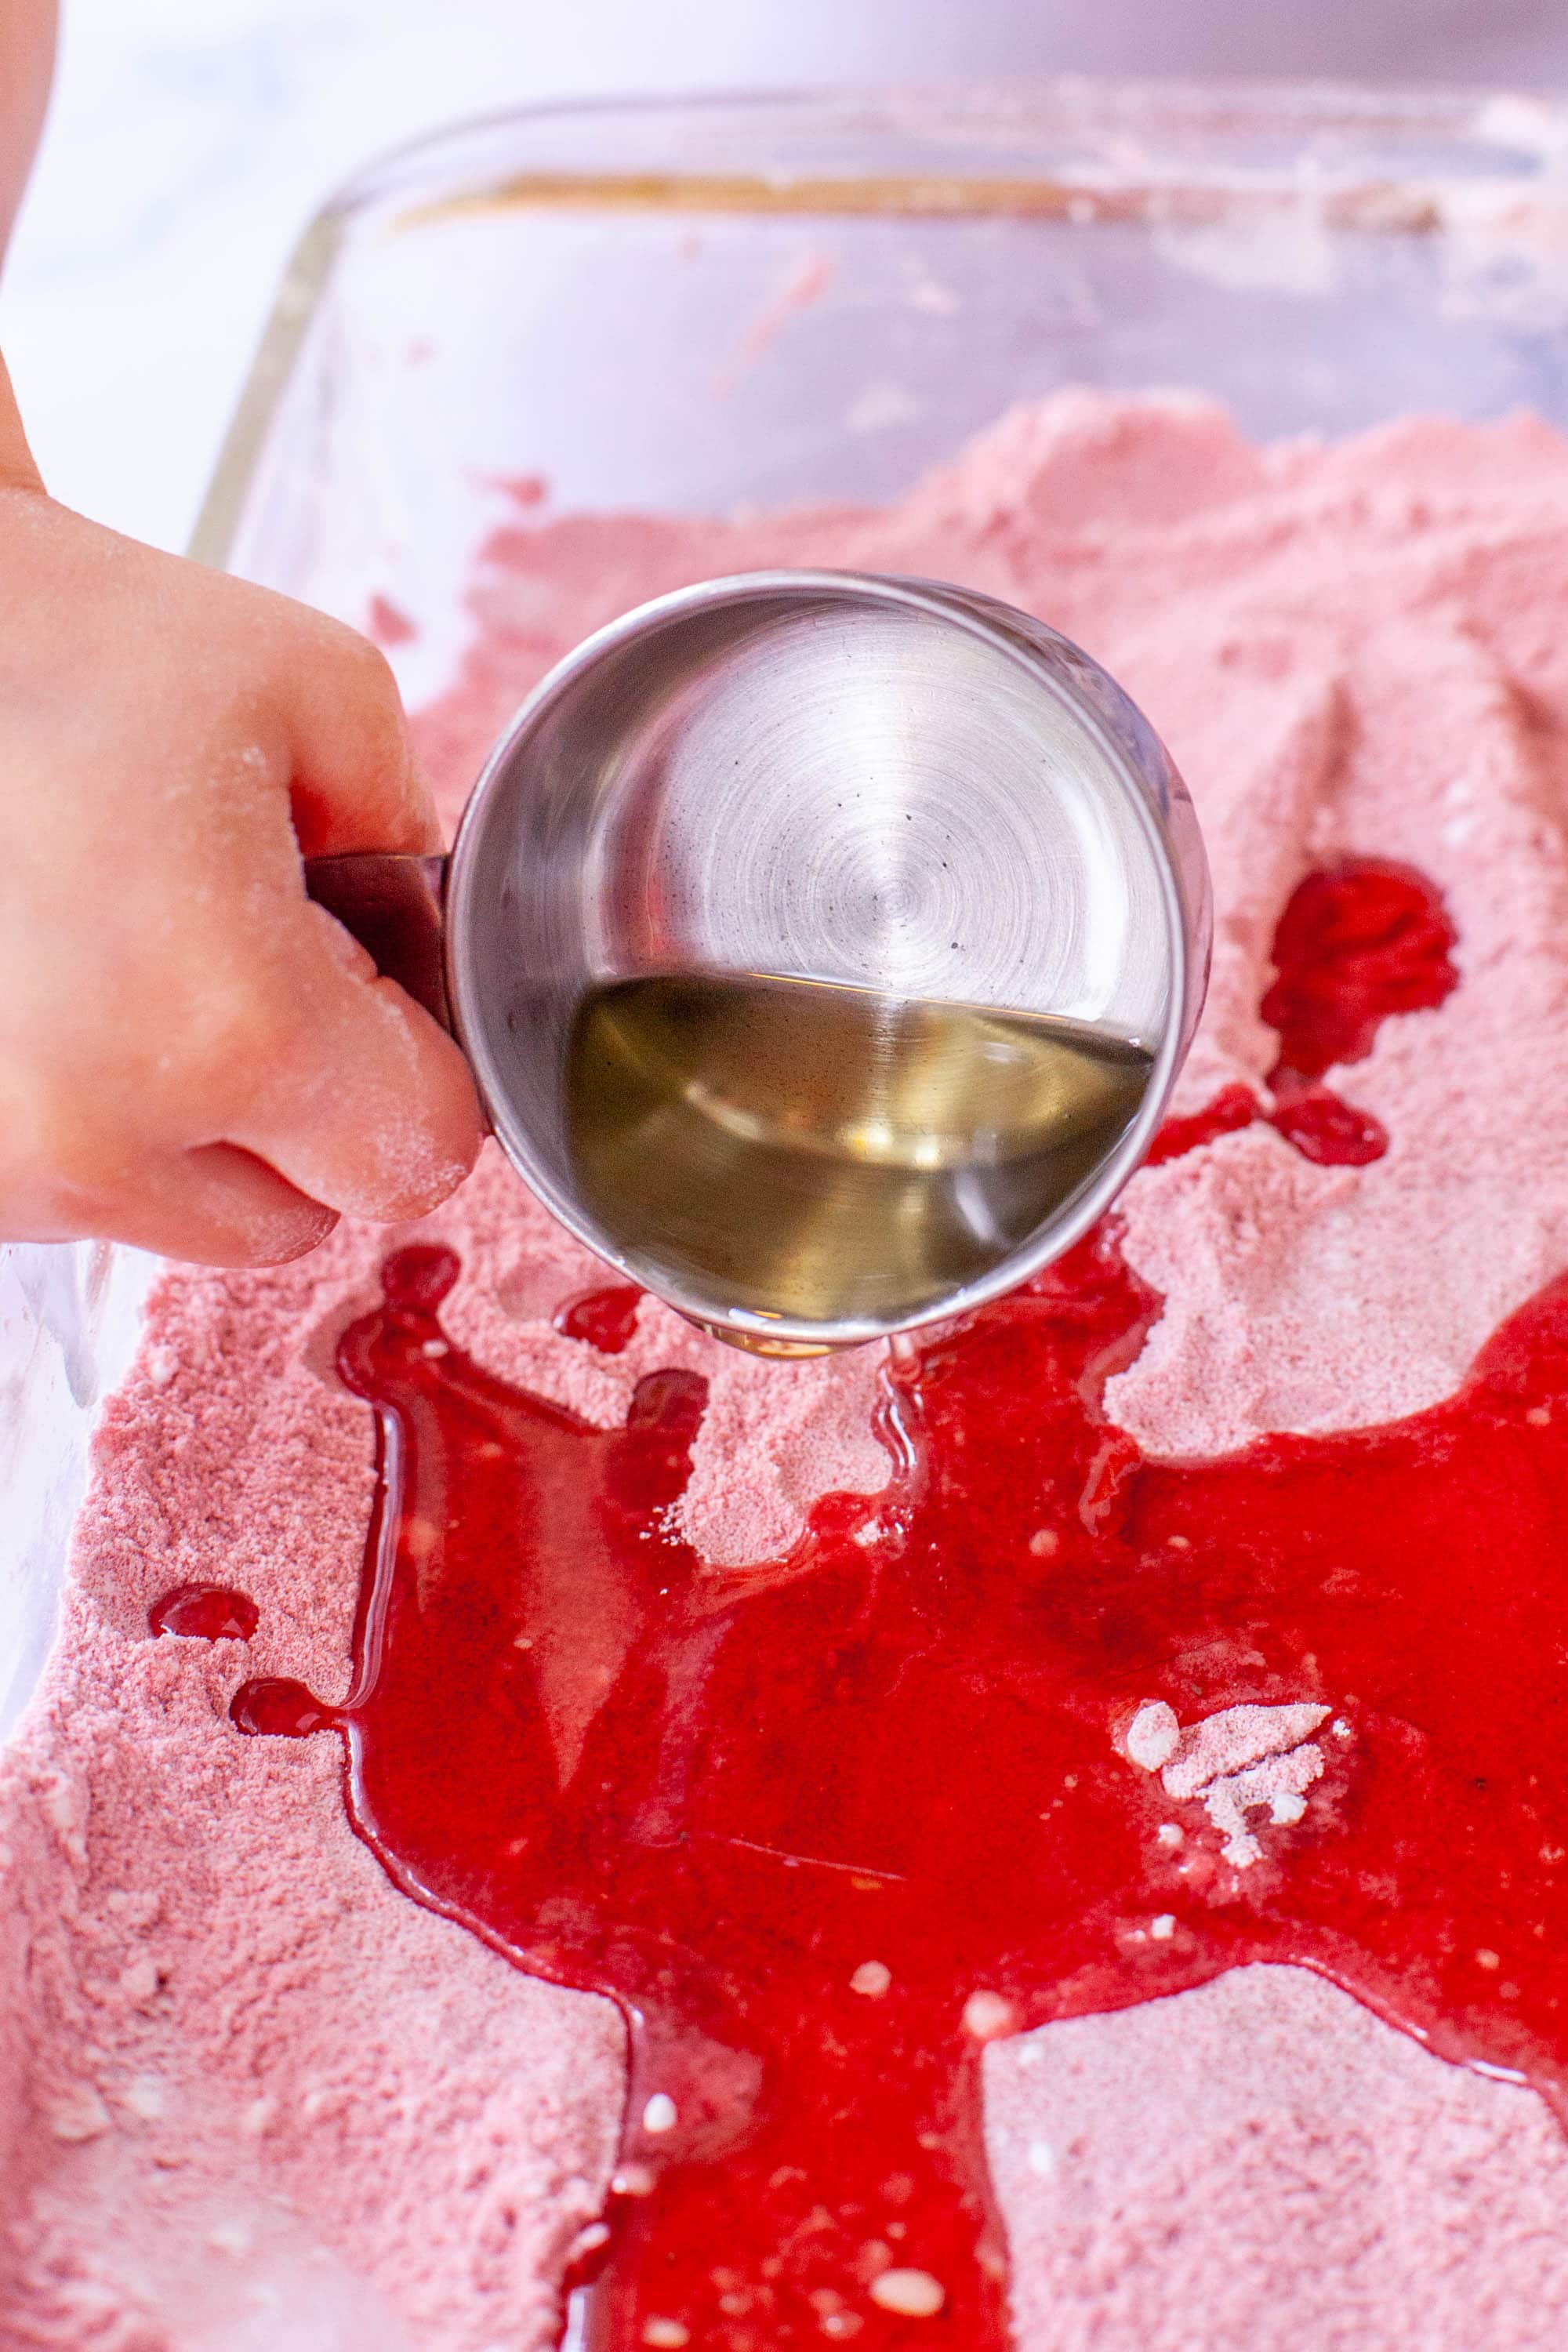 Pouring oil into sand and cornstarch for DIY kinetic sand